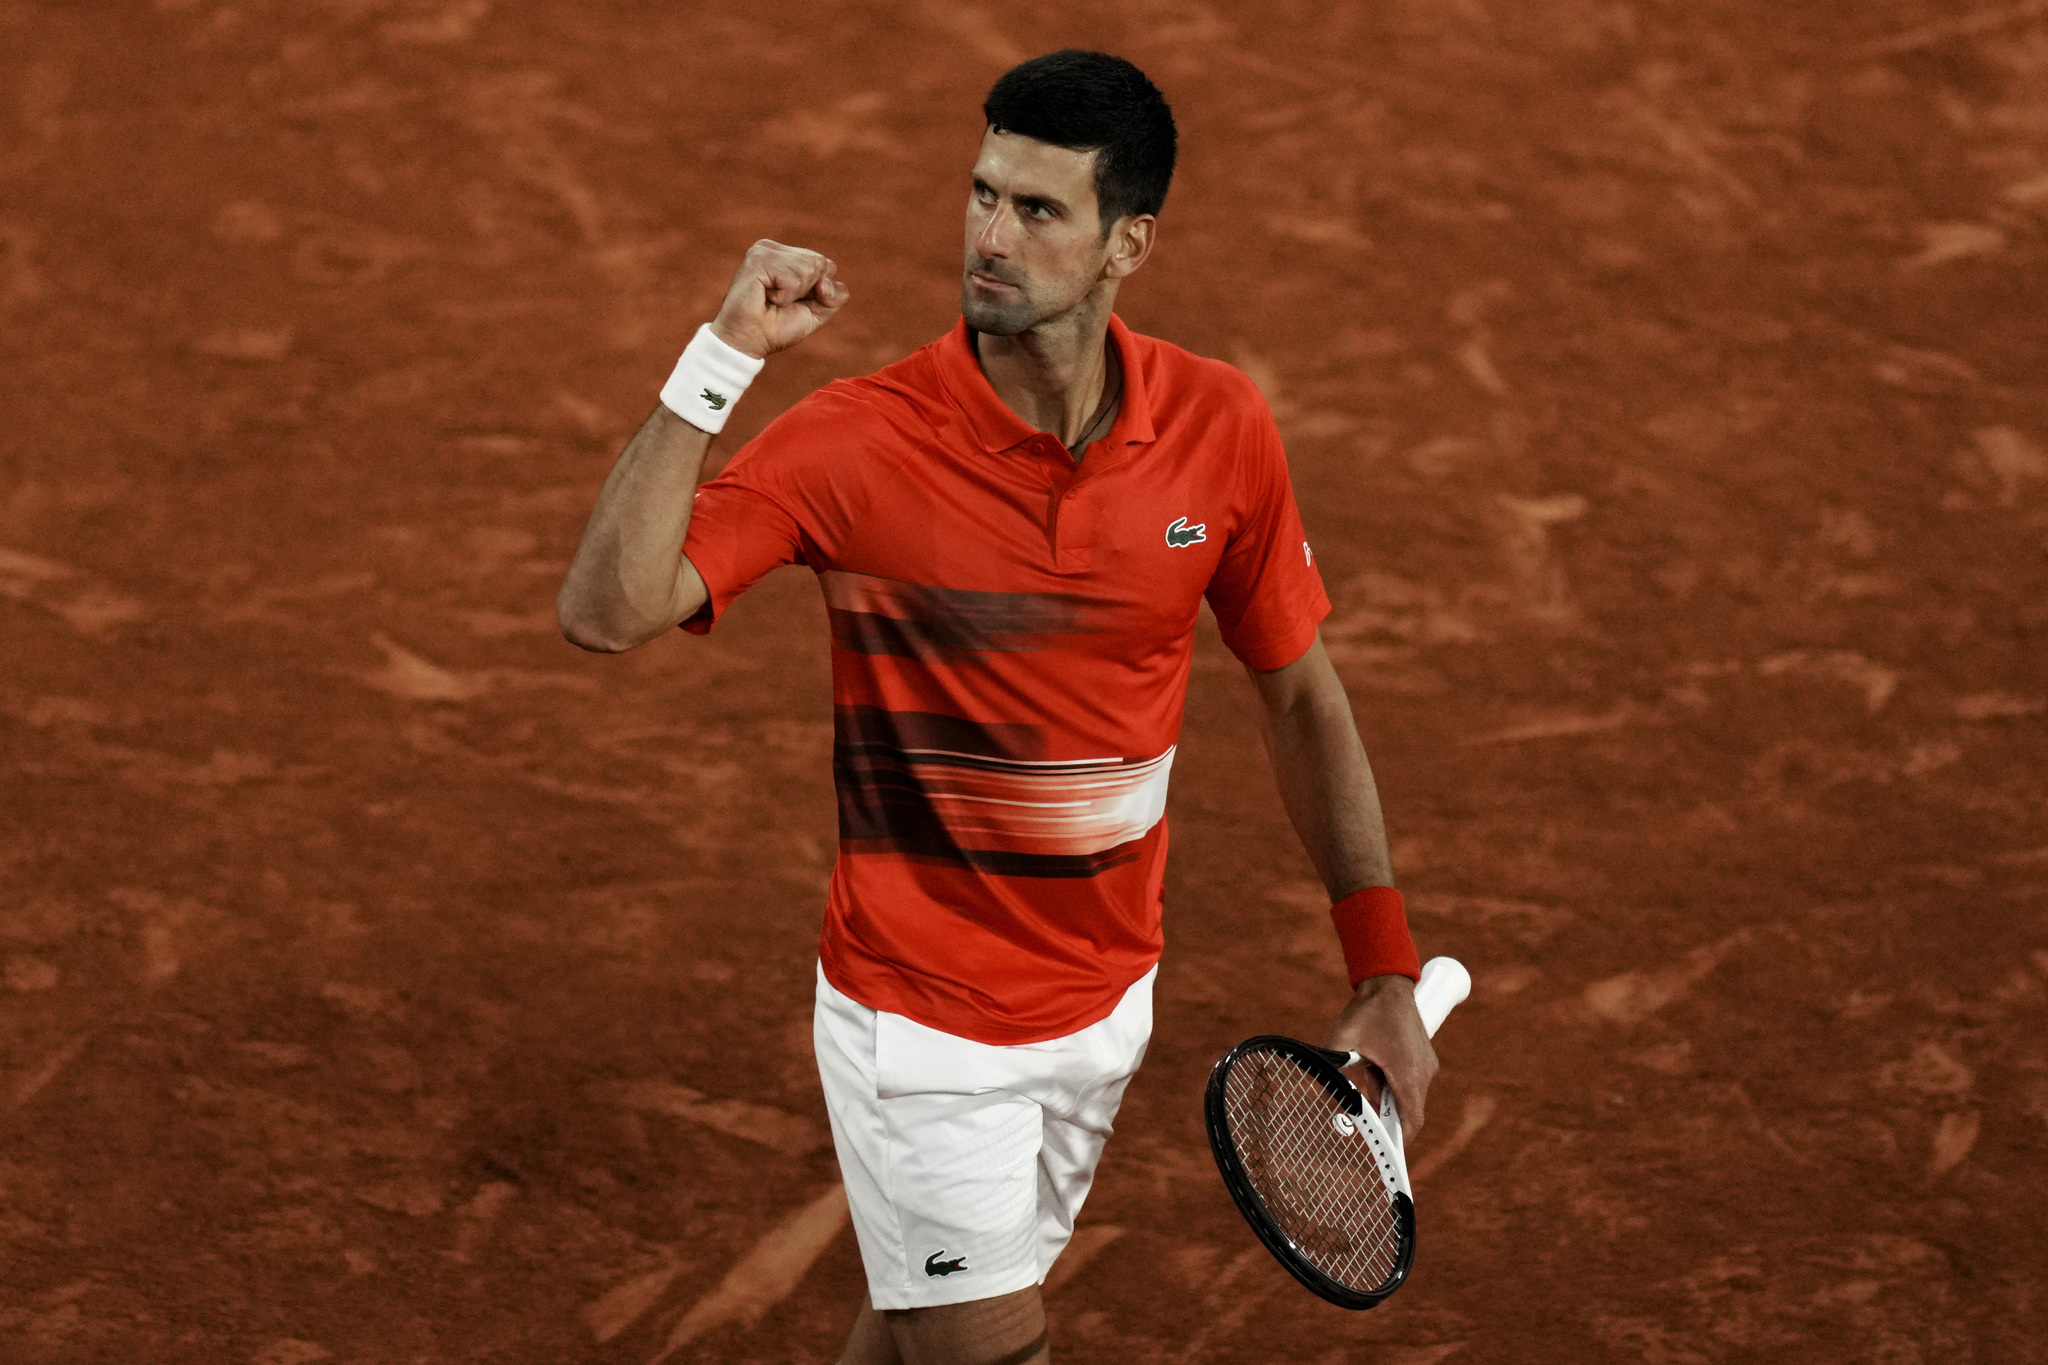 Serbia's Novak  lt;HIT gt;Djokovic lt;/HIT gt; celebrates winning the second set as he plays Spain's Rafael  lt;HIT gt;Nadal lt;/HIT gt; during their quarterfinal match of the French Open tennis tournament at the Roland Garros stadium Tuesday, May 31, 2022 in Paris. (AP Photo/Thibault Camus)